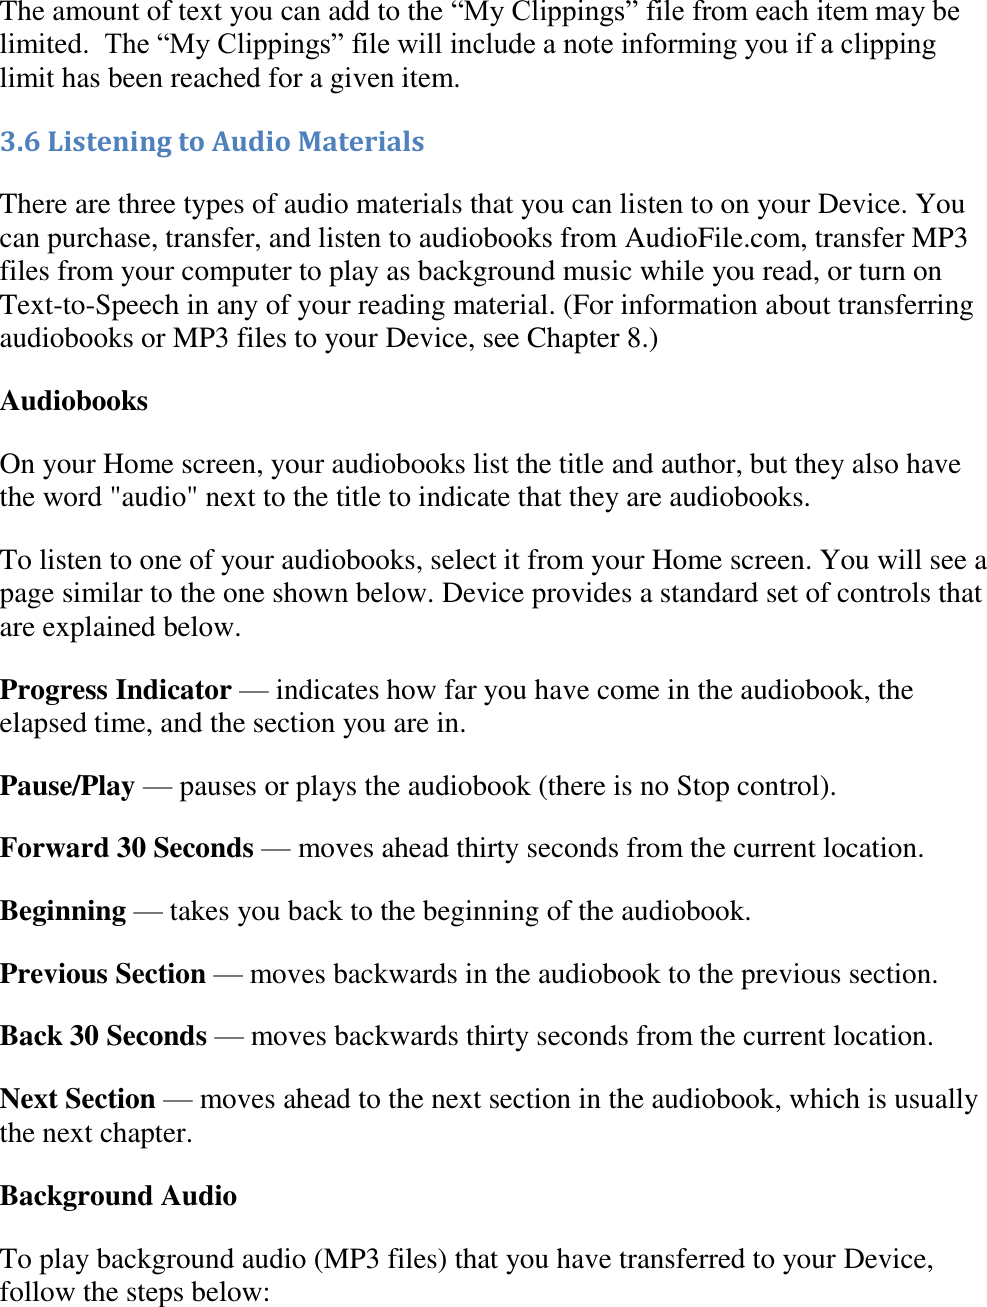   The amount of text you can add to the “My Clippings” file from each item may be limited.  The “My Clippings” file will include a note informing you if a clipping limit has been reached for a given item.  3.6 Listening to Audio Materials There are three types of audio materials that you can listen to on your Device. You can purchase, transfer, and listen to audiobooks from AudioFile.com, transfer MP3 files from your computer to play as background music while you read, or turn on Text-to-Speech in any of your reading material. (For information about transferring audiobooks or MP3 files to your Device, see Chapter 8.) Audiobooks On your Home screen, your audiobooks list the title and author, but they also have the word &quot;audio&quot; next to the title to indicate that they are audiobooks.  To listen to one of your audiobooks, select it from your Home screen. You will see a page similar to the one shown below. Device provides a standard set of controls that are explained below. Progress Indicator — indicates how far you have come in the audiobook, the elapsed time, and the section you are in. Pause/Play — pauses or plays the audiobook (there is no Stop control). Forward 30 Seconds — moves ahead thirty seconds from the current location. Beginning — takes you back to the beginning of the audiobook. Previous Section — moves backwards in the audiobook to the previous section. Back 30 Seconds — moves backwards thirty seconds from the current location. Next Section — moves ahead to the next section in the audiobook, which is usually the next chapter. Background Audio To play background audio (MP3 files) that you have transferred to your Device, follow the steps below: 